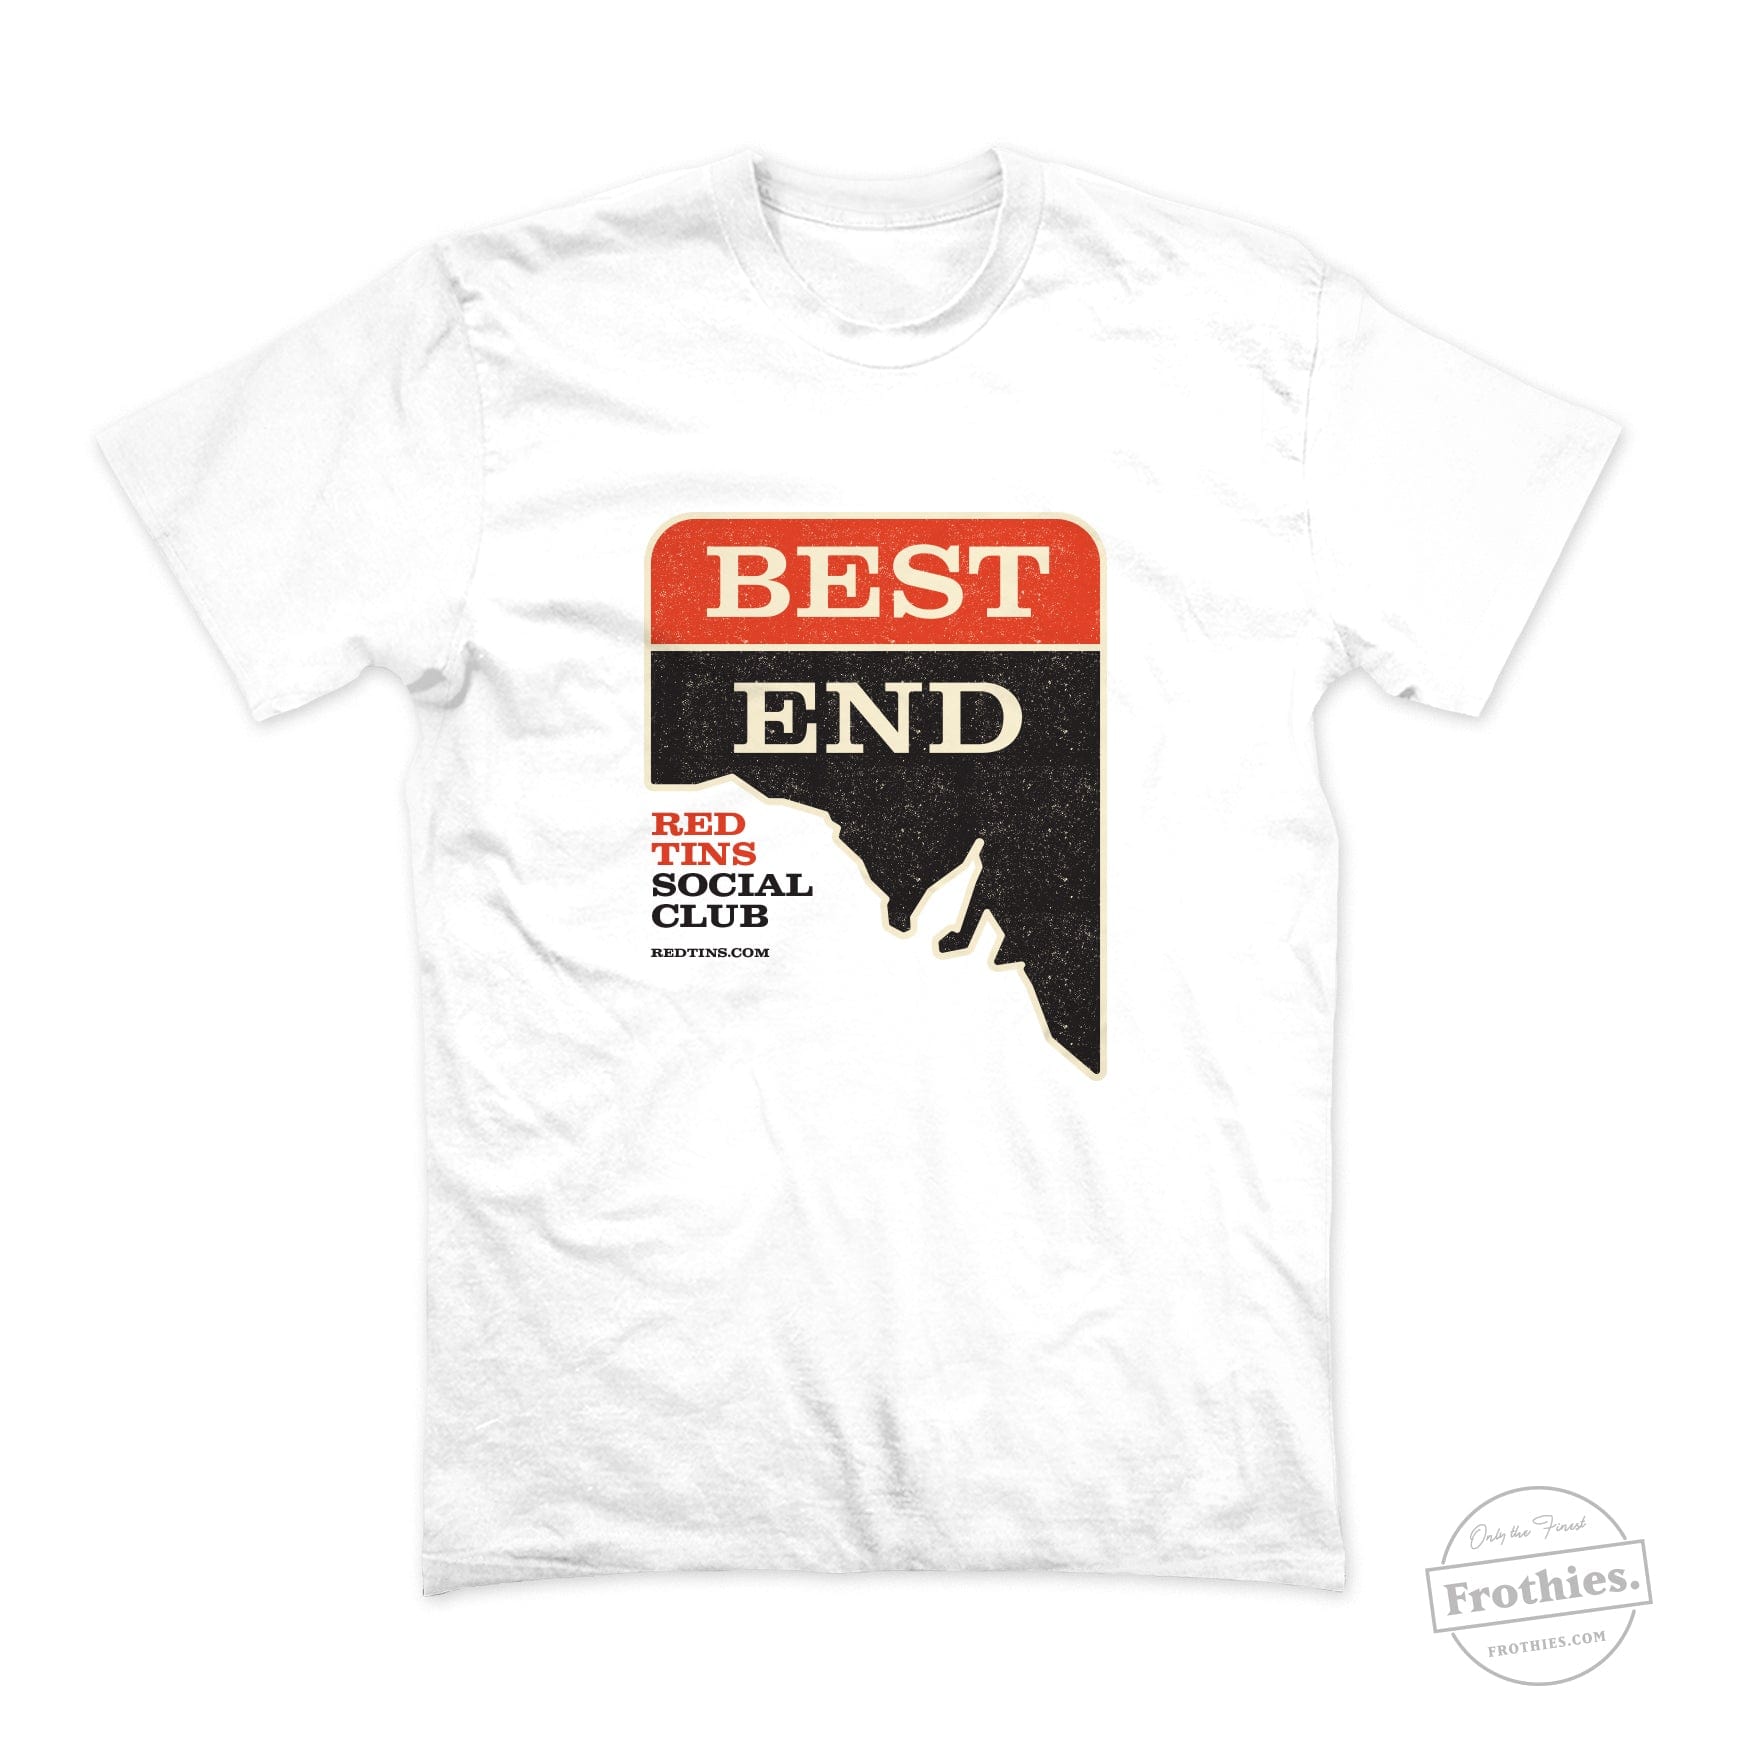 The Best End, Vintage, State Tee T-Shirt Red Tins